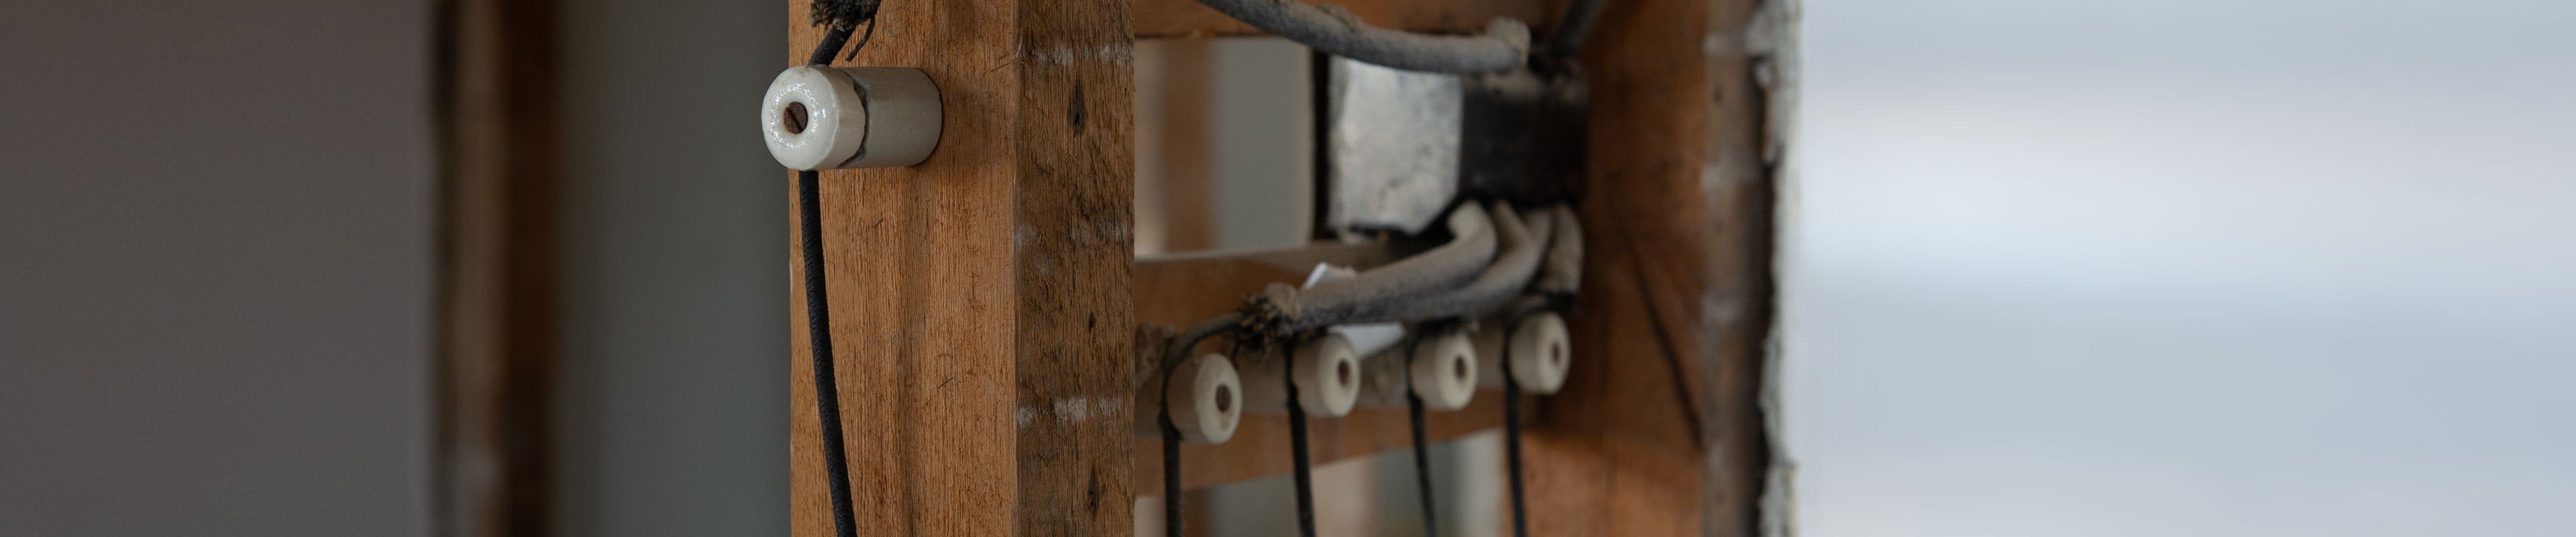 Image of exposed knob and tube wiring within the framing of a home's wall.